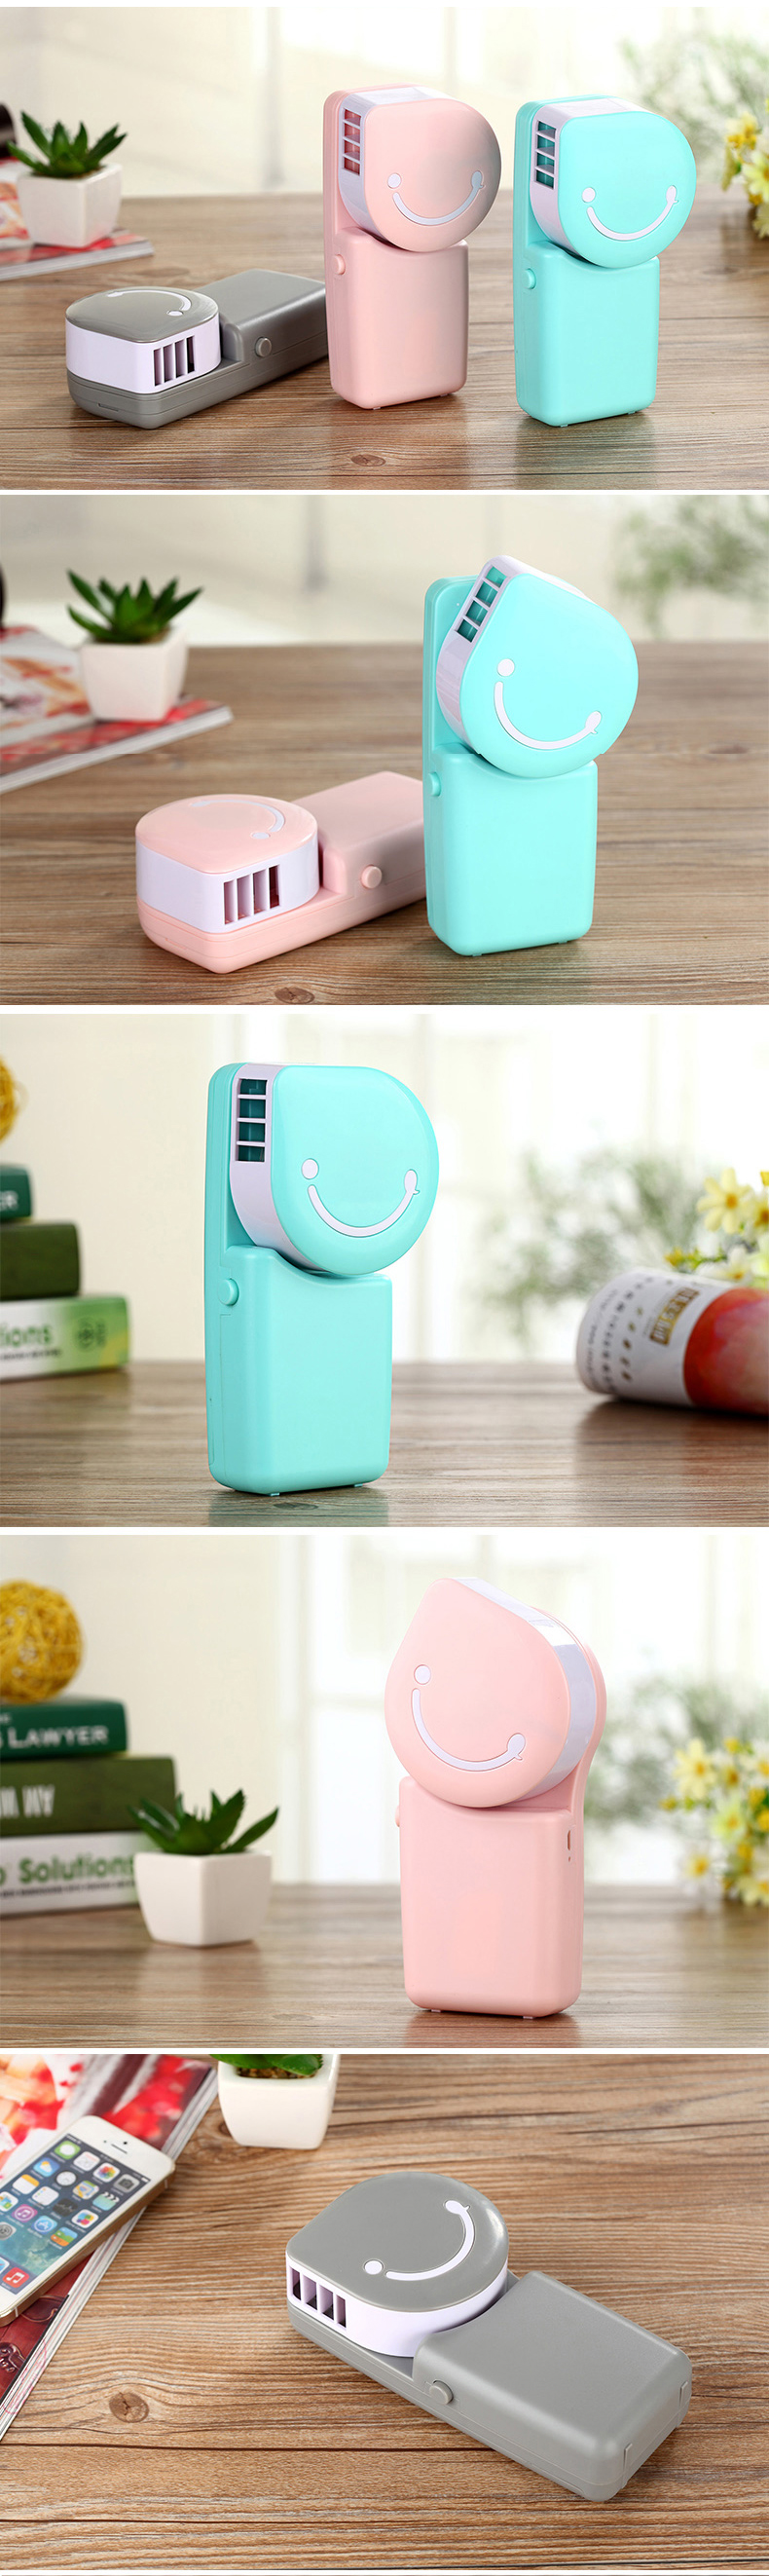 Loskii LX-882 Summer Mini Fan Cooling Portable Air Conditioning USB Charge Hand-held Cool Fan 77